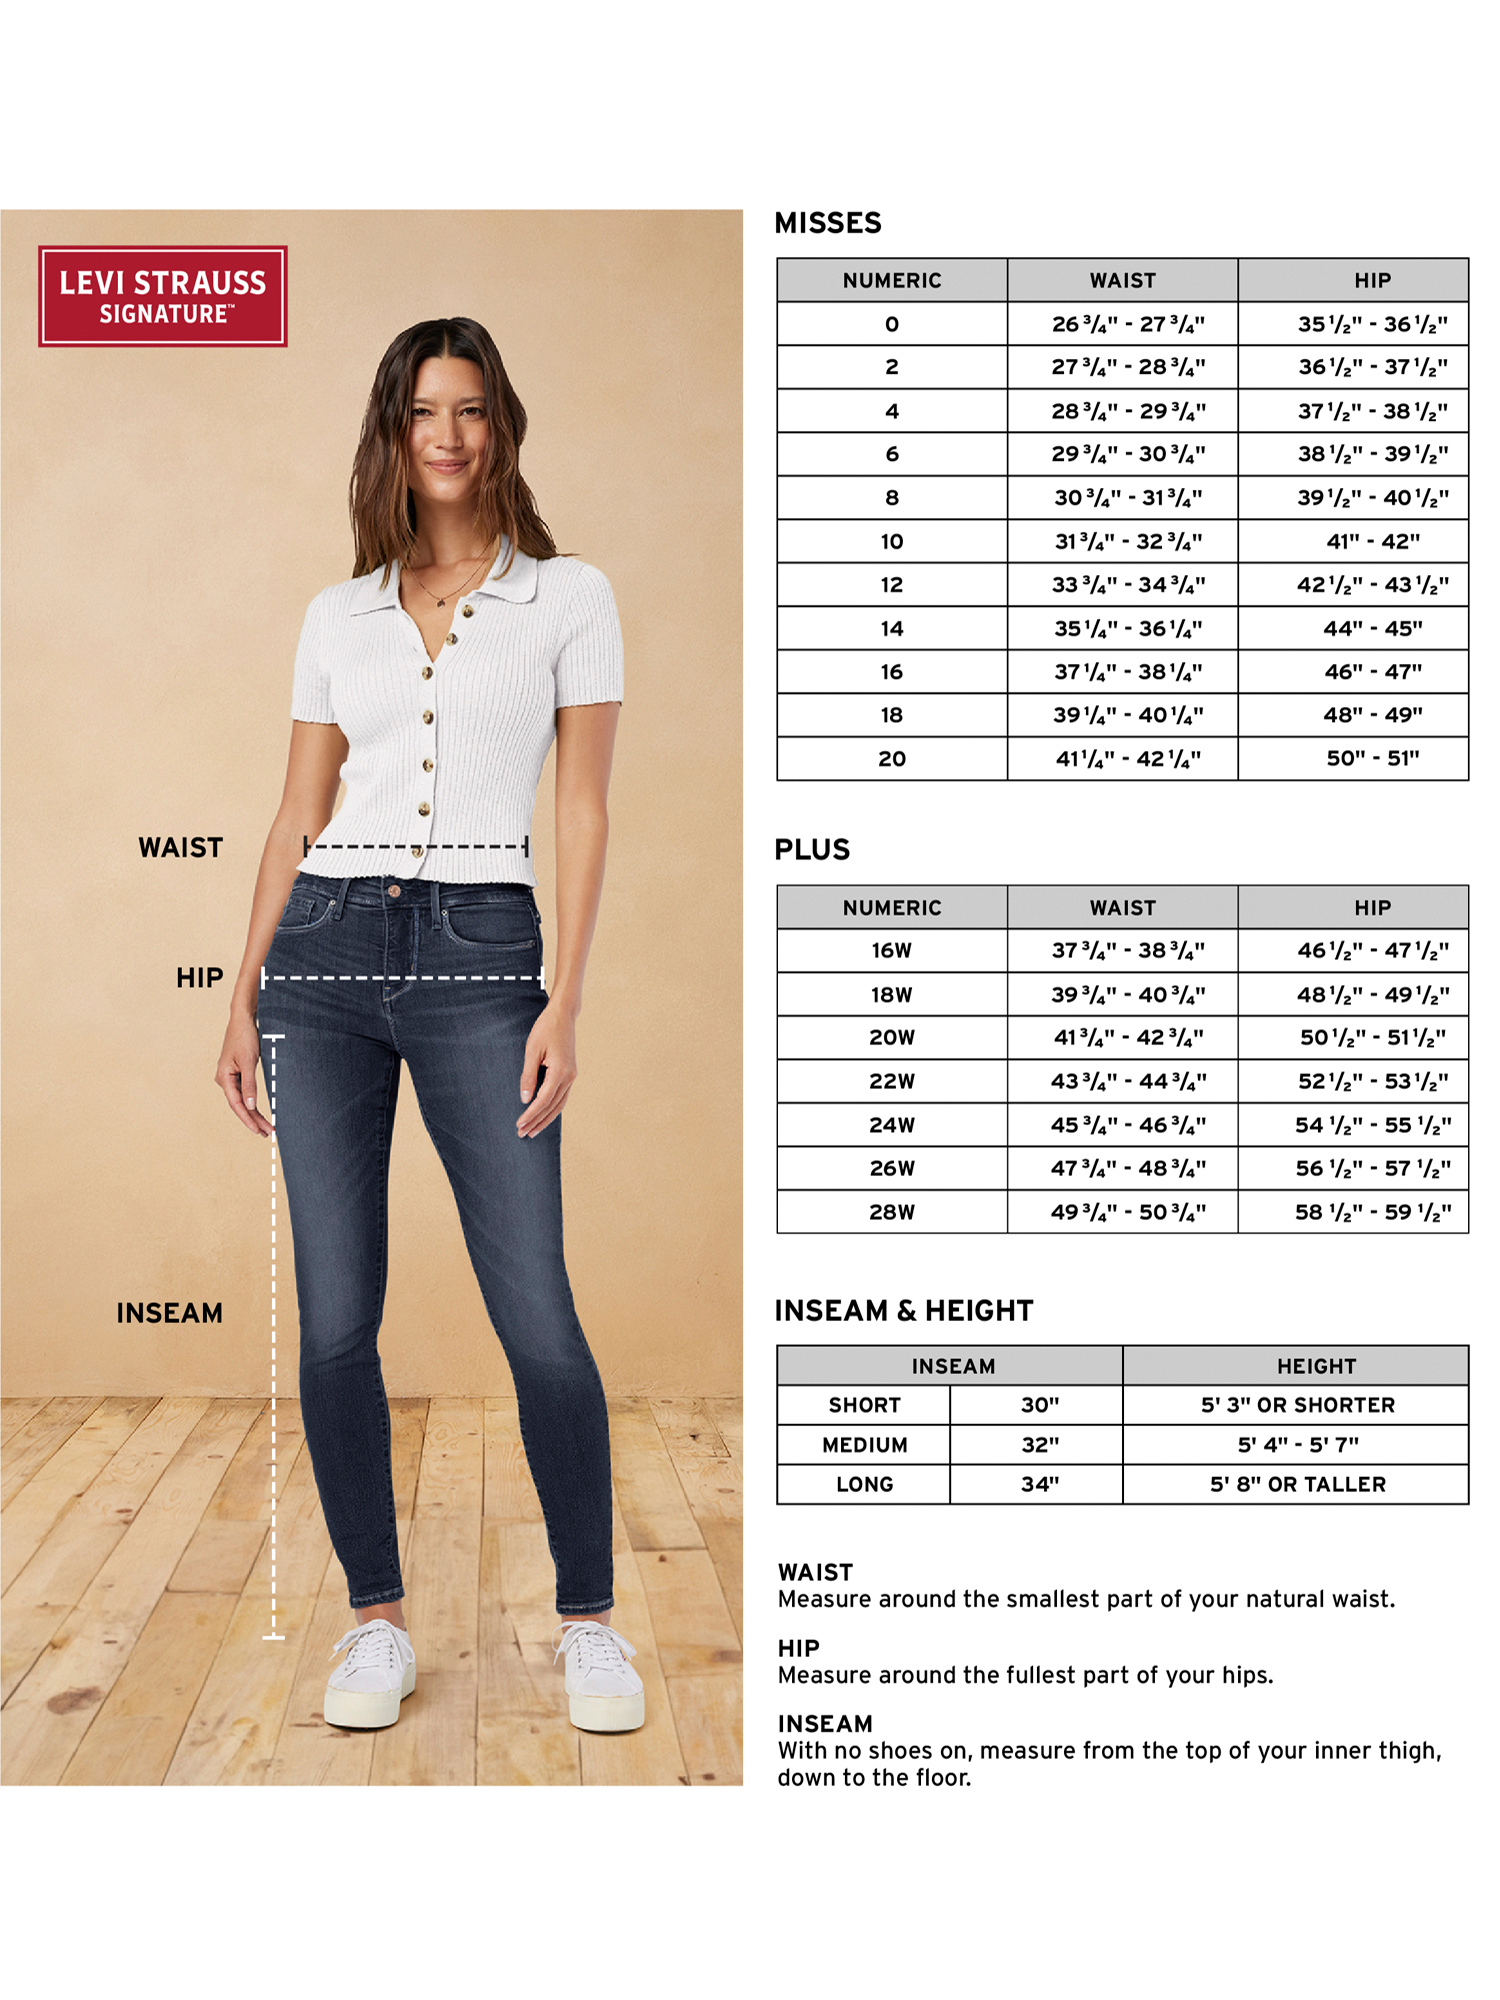 Signature by Levi Strauss & Co. Women's and Women's Plus Mid Rise Capri Jeans, Sizes 0-28 - image 2 of 5